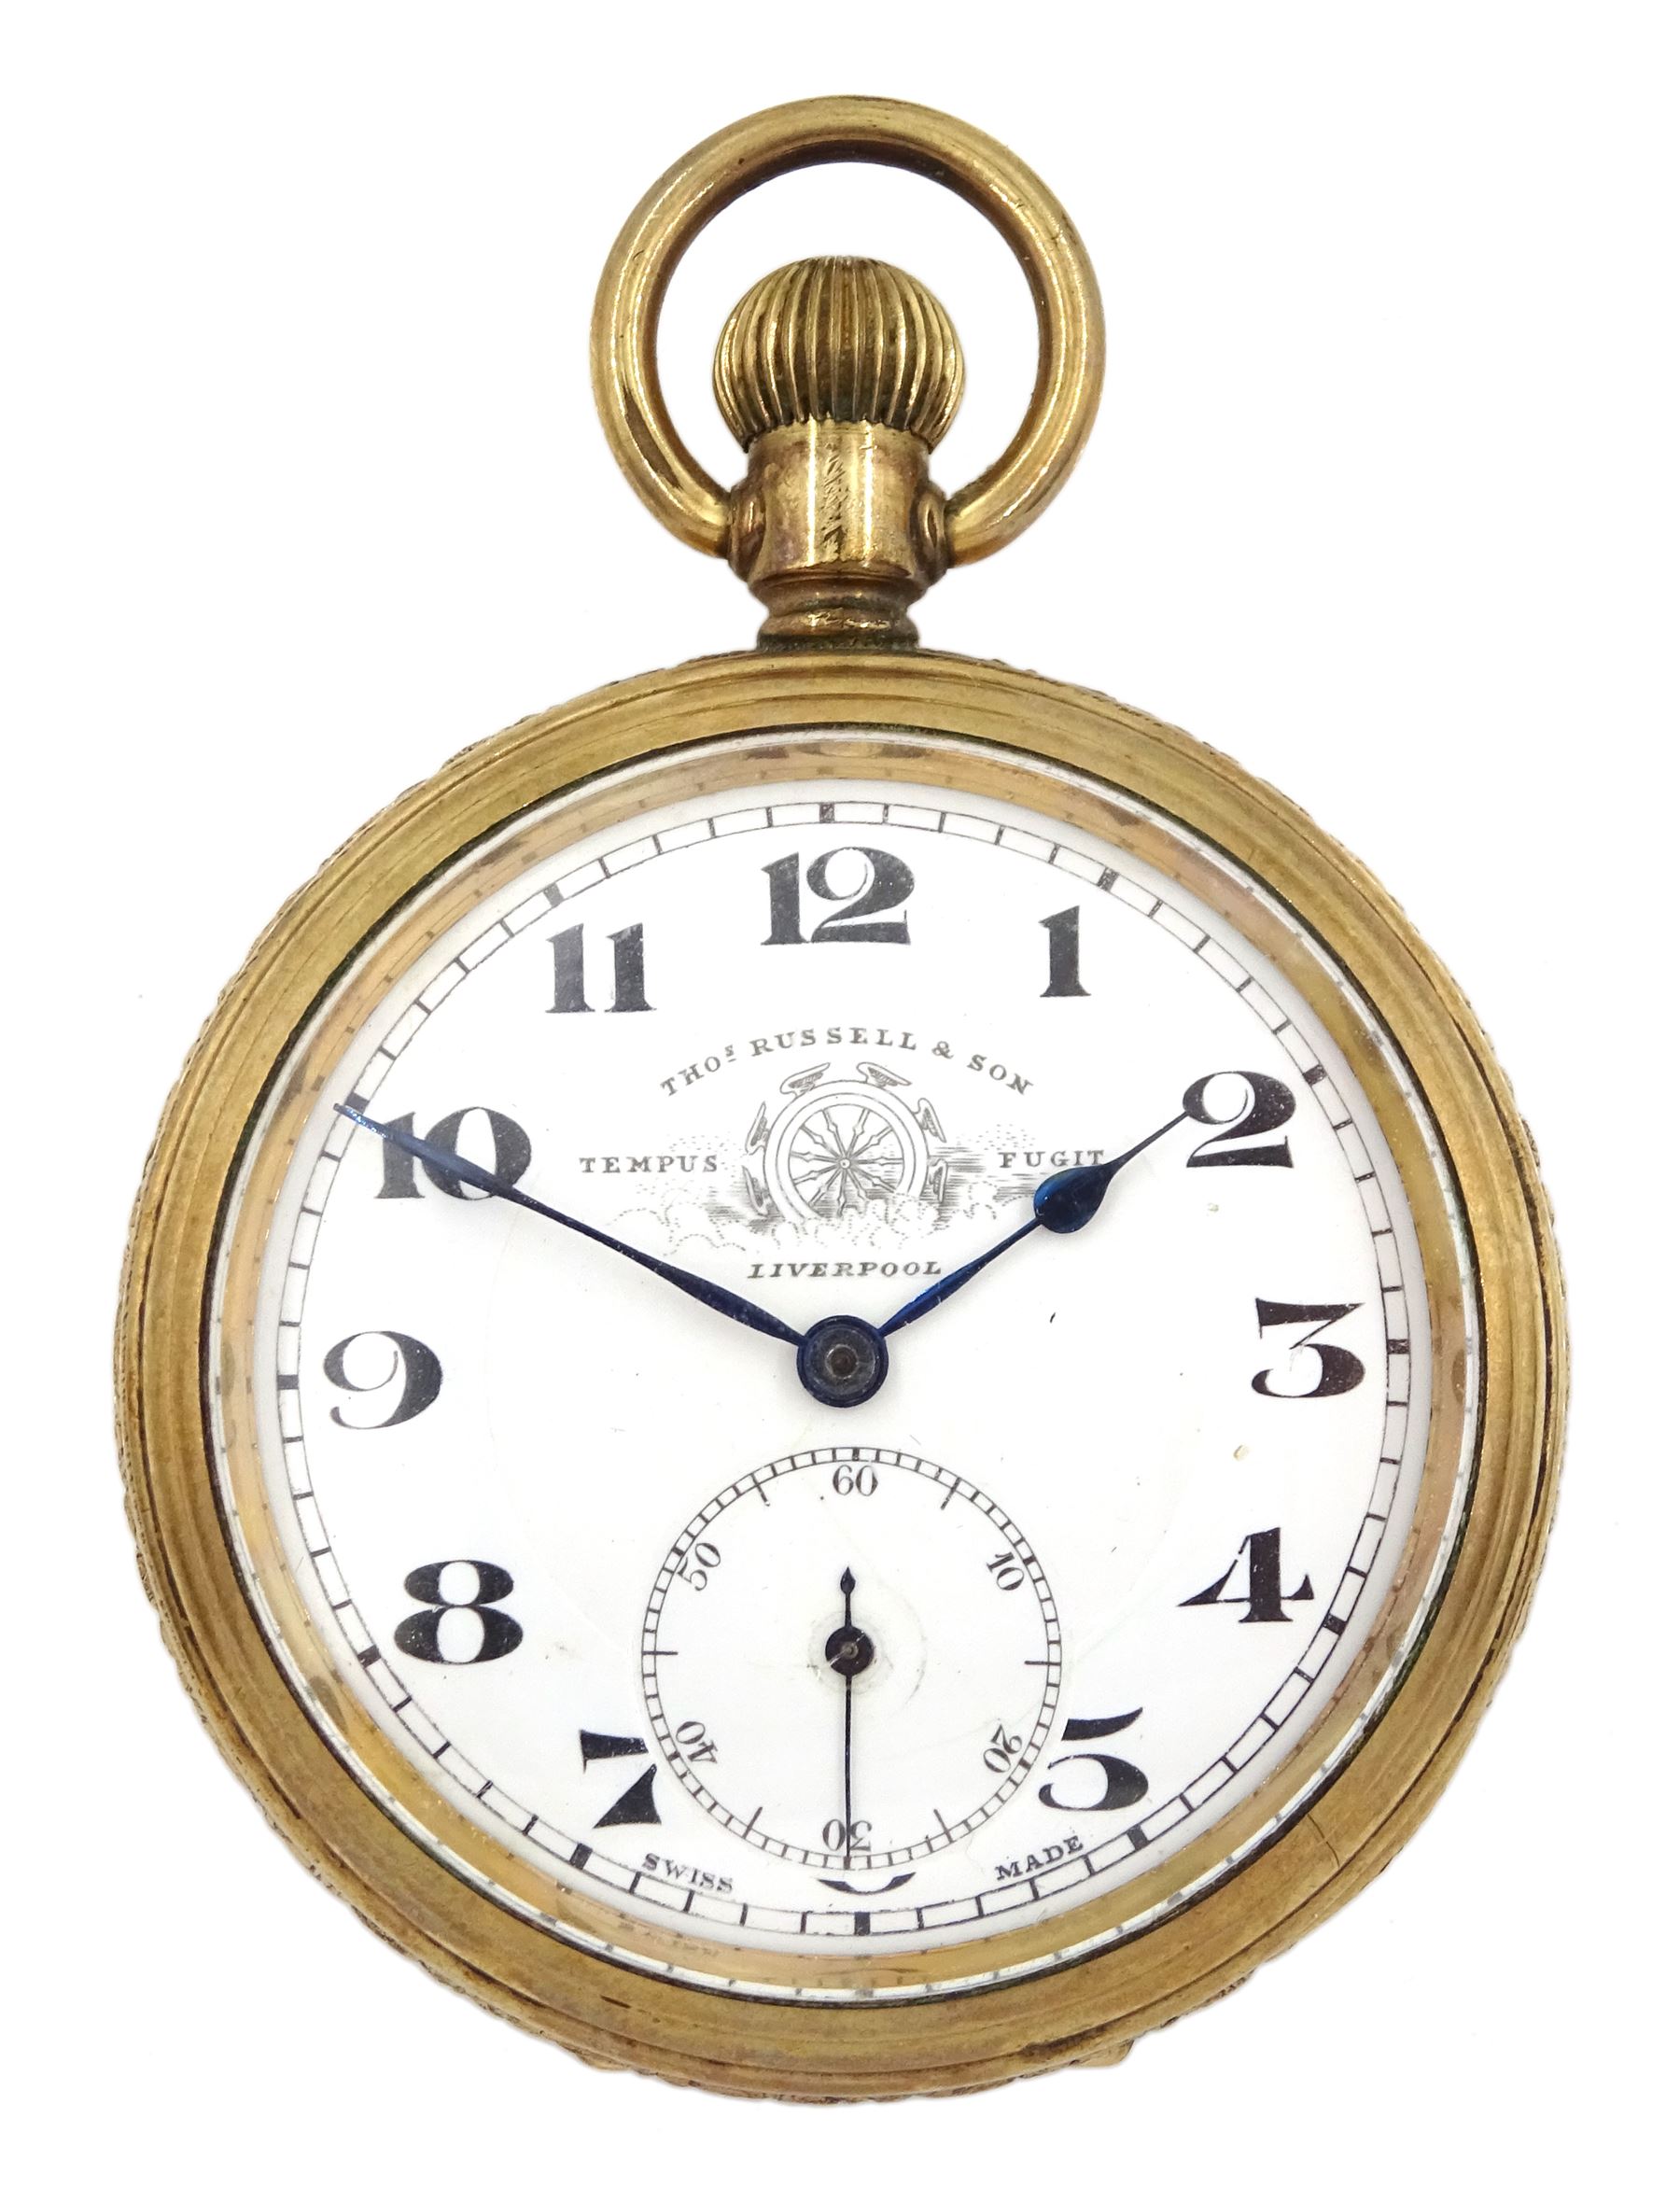 Early 20th century gold-plated open face keyless lever pocket watch by Thomas Russell & Son Liverpoo